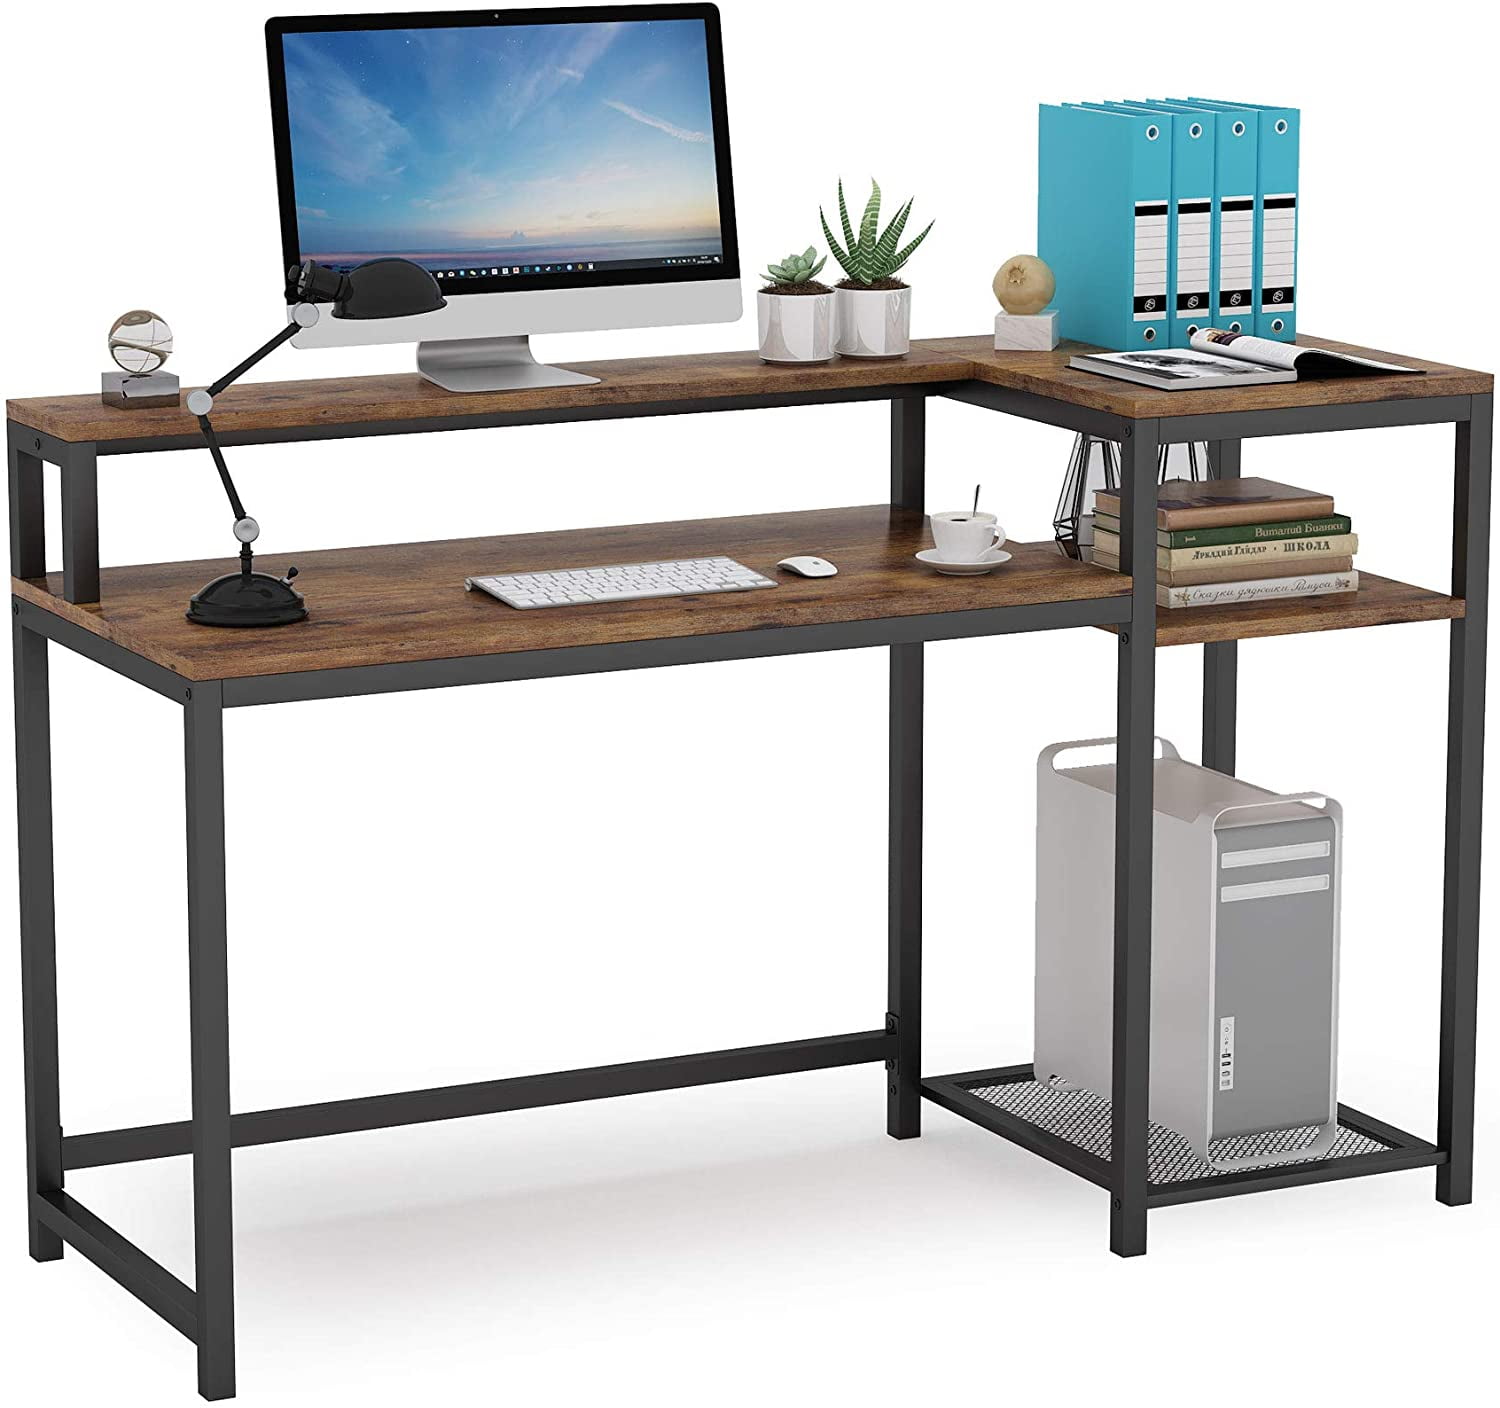 2 Shelves for Home Office Bedroom Easy To assemble Tribesigns Computer Desk Industrial Writing Desk for Study Computer Workstations PC Desk Table with Metal Frame Living Room Black